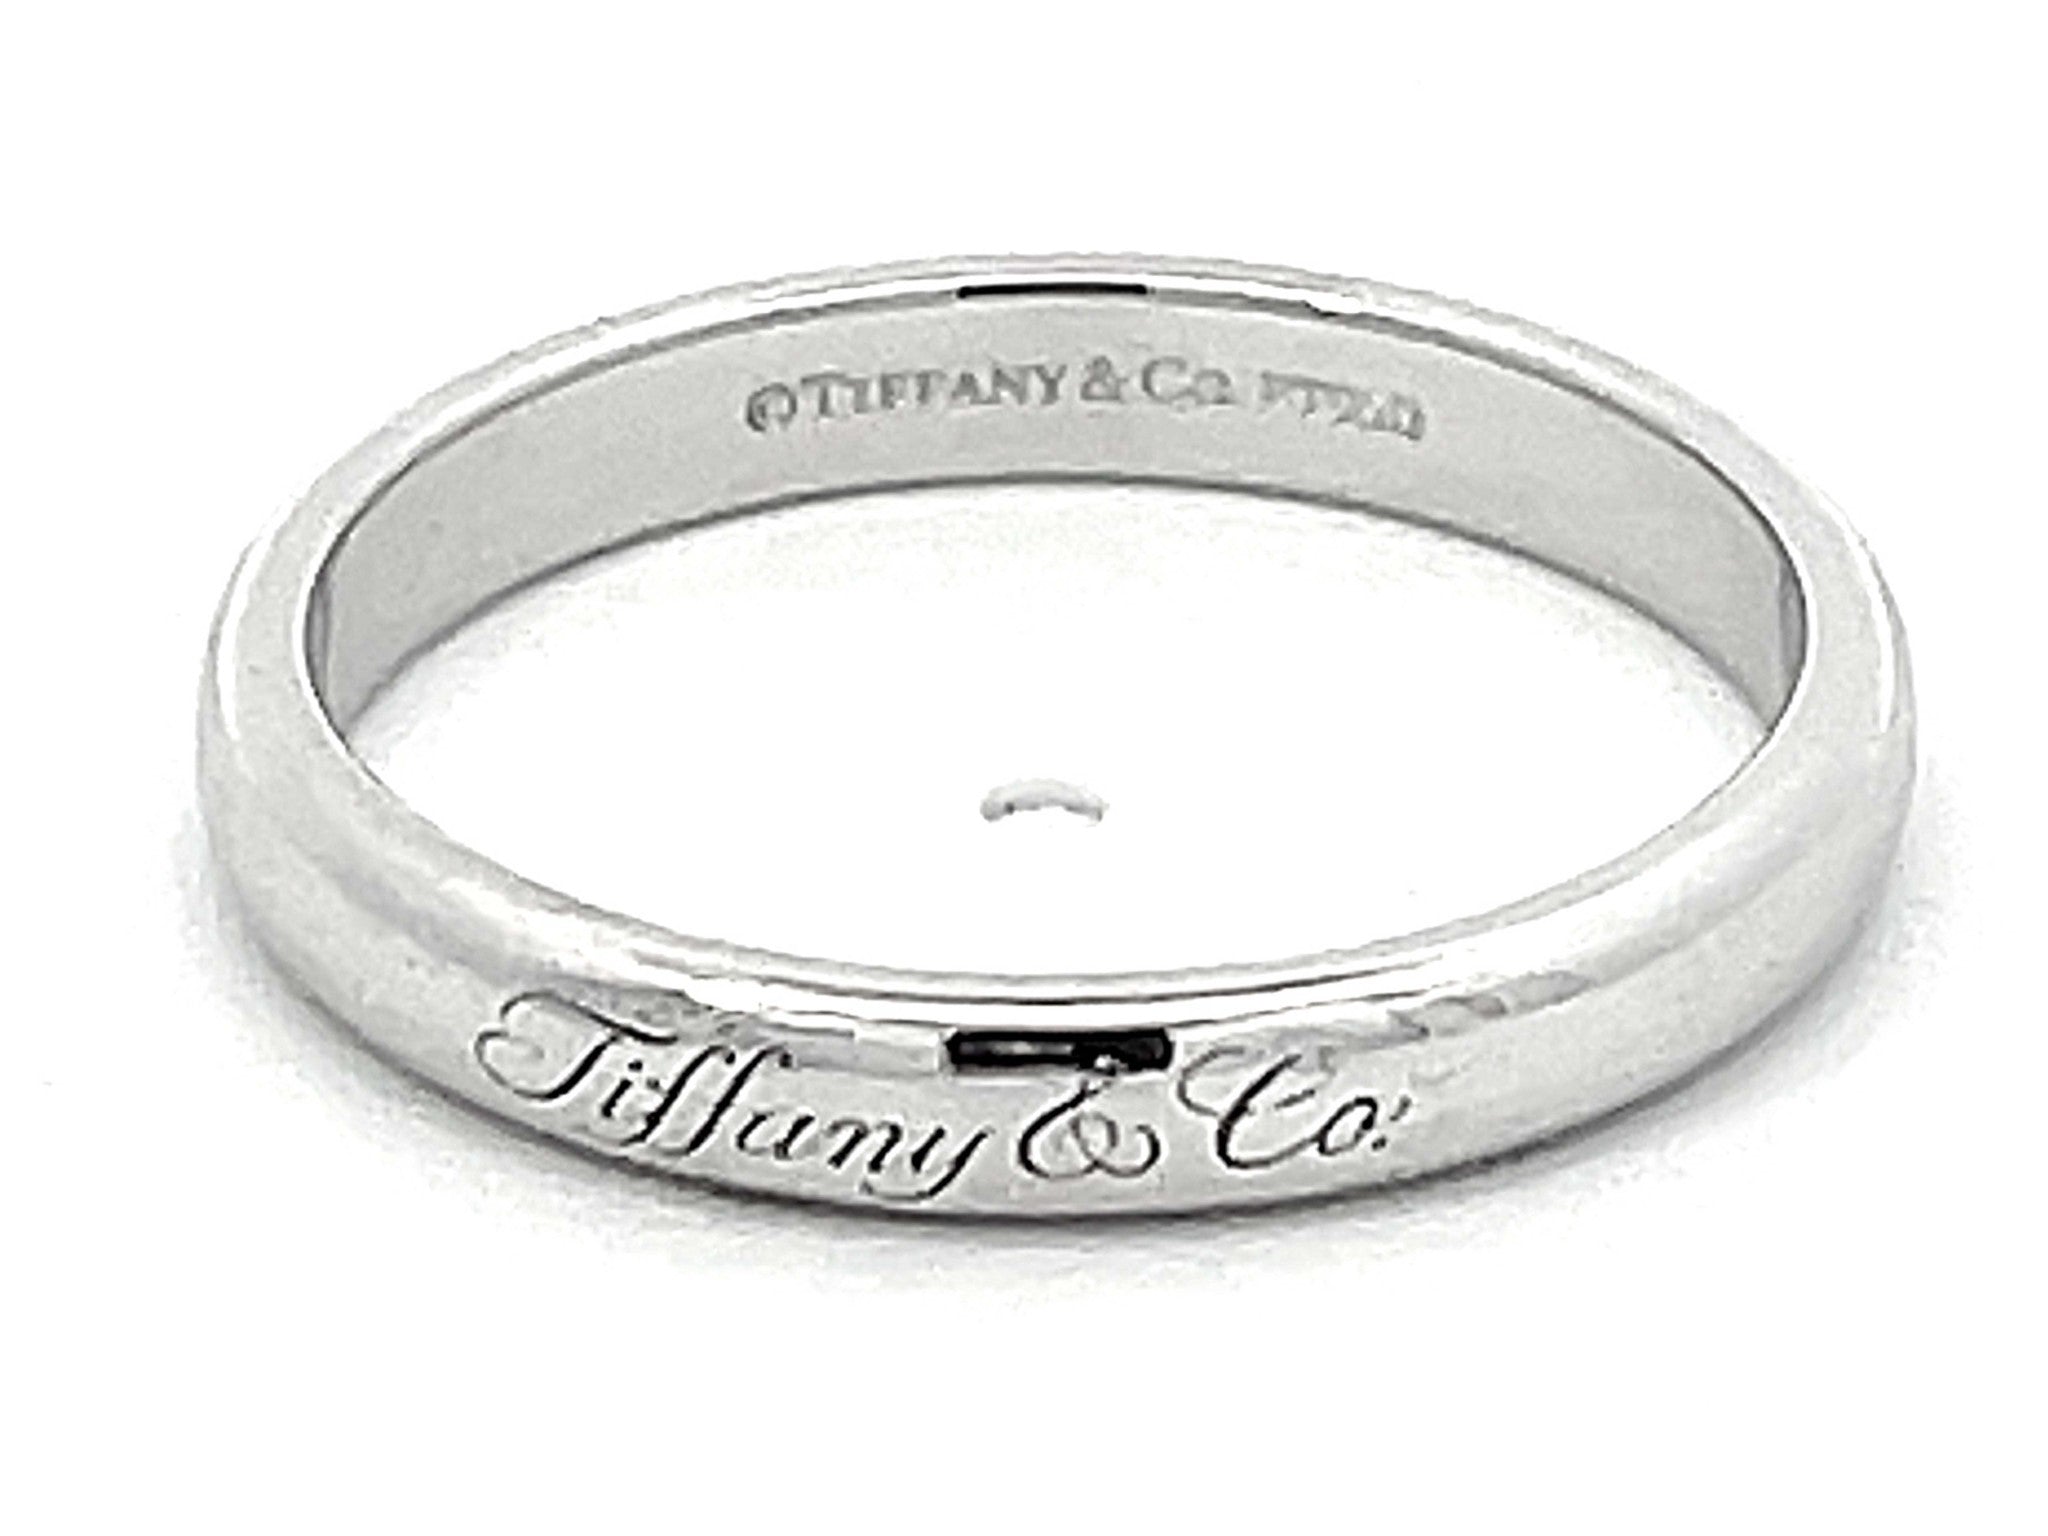 Vintage Tiffany & Co. Wedding Band Ring in Platinum 3 mm Wide